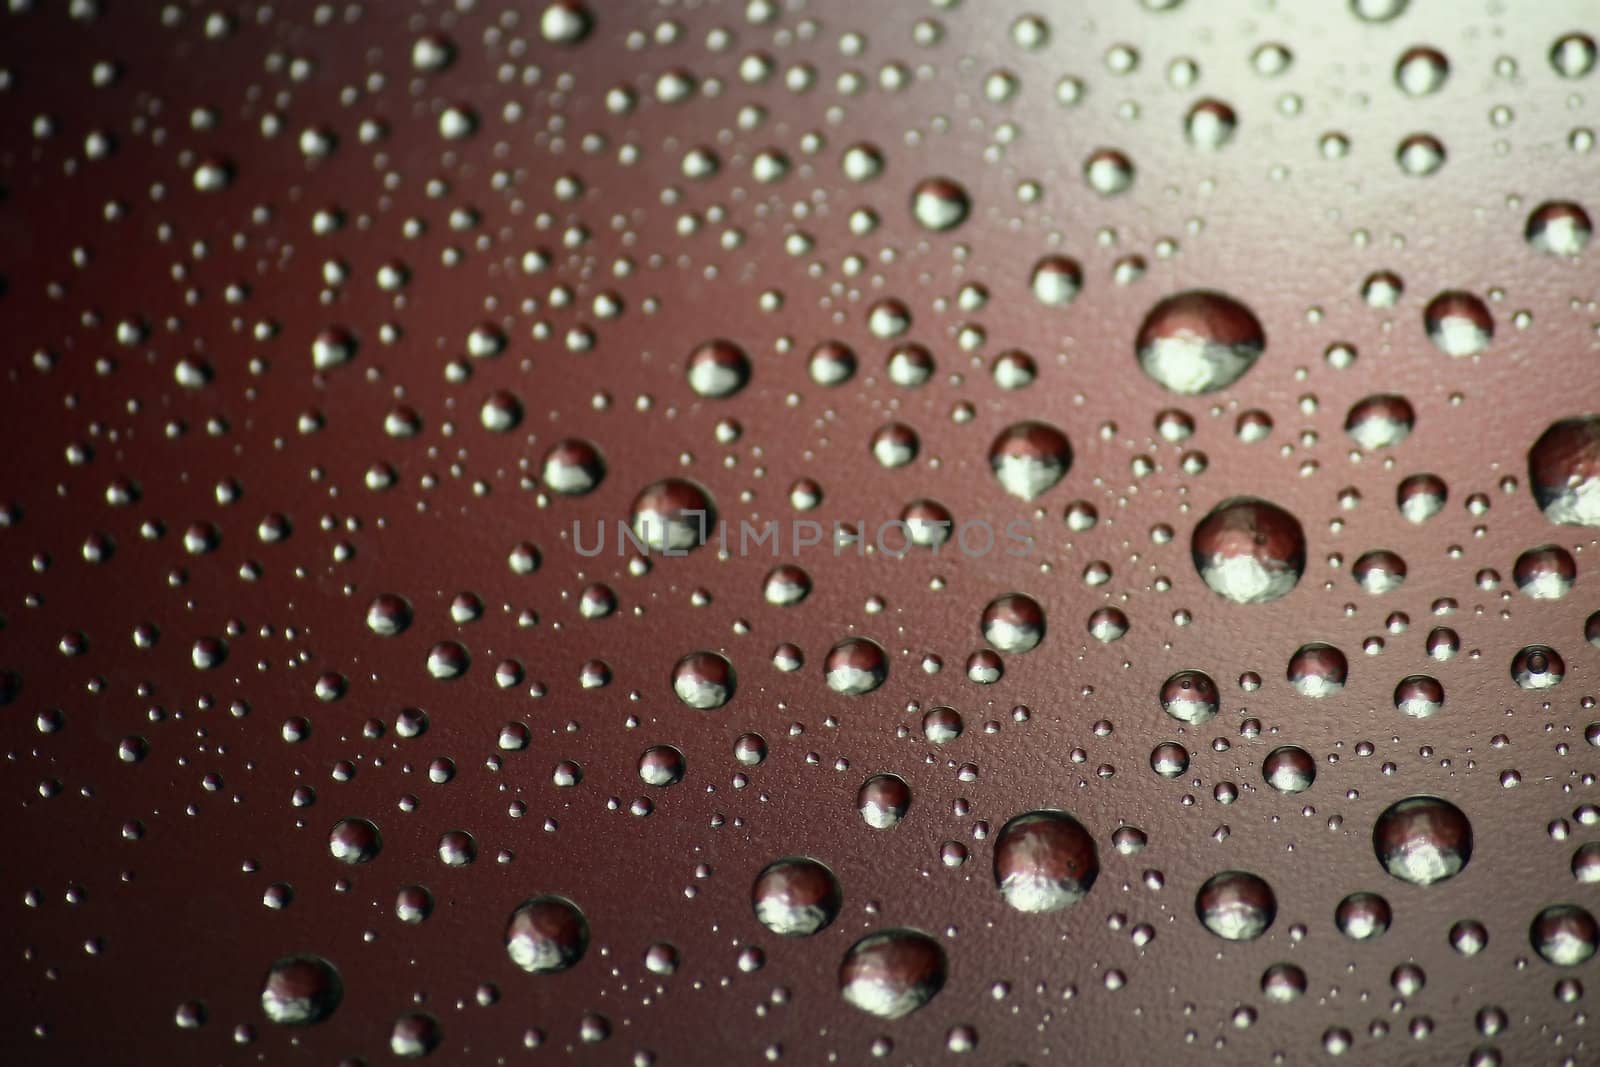 We see an unusual background. These are multi-colored drops of water on a surface.